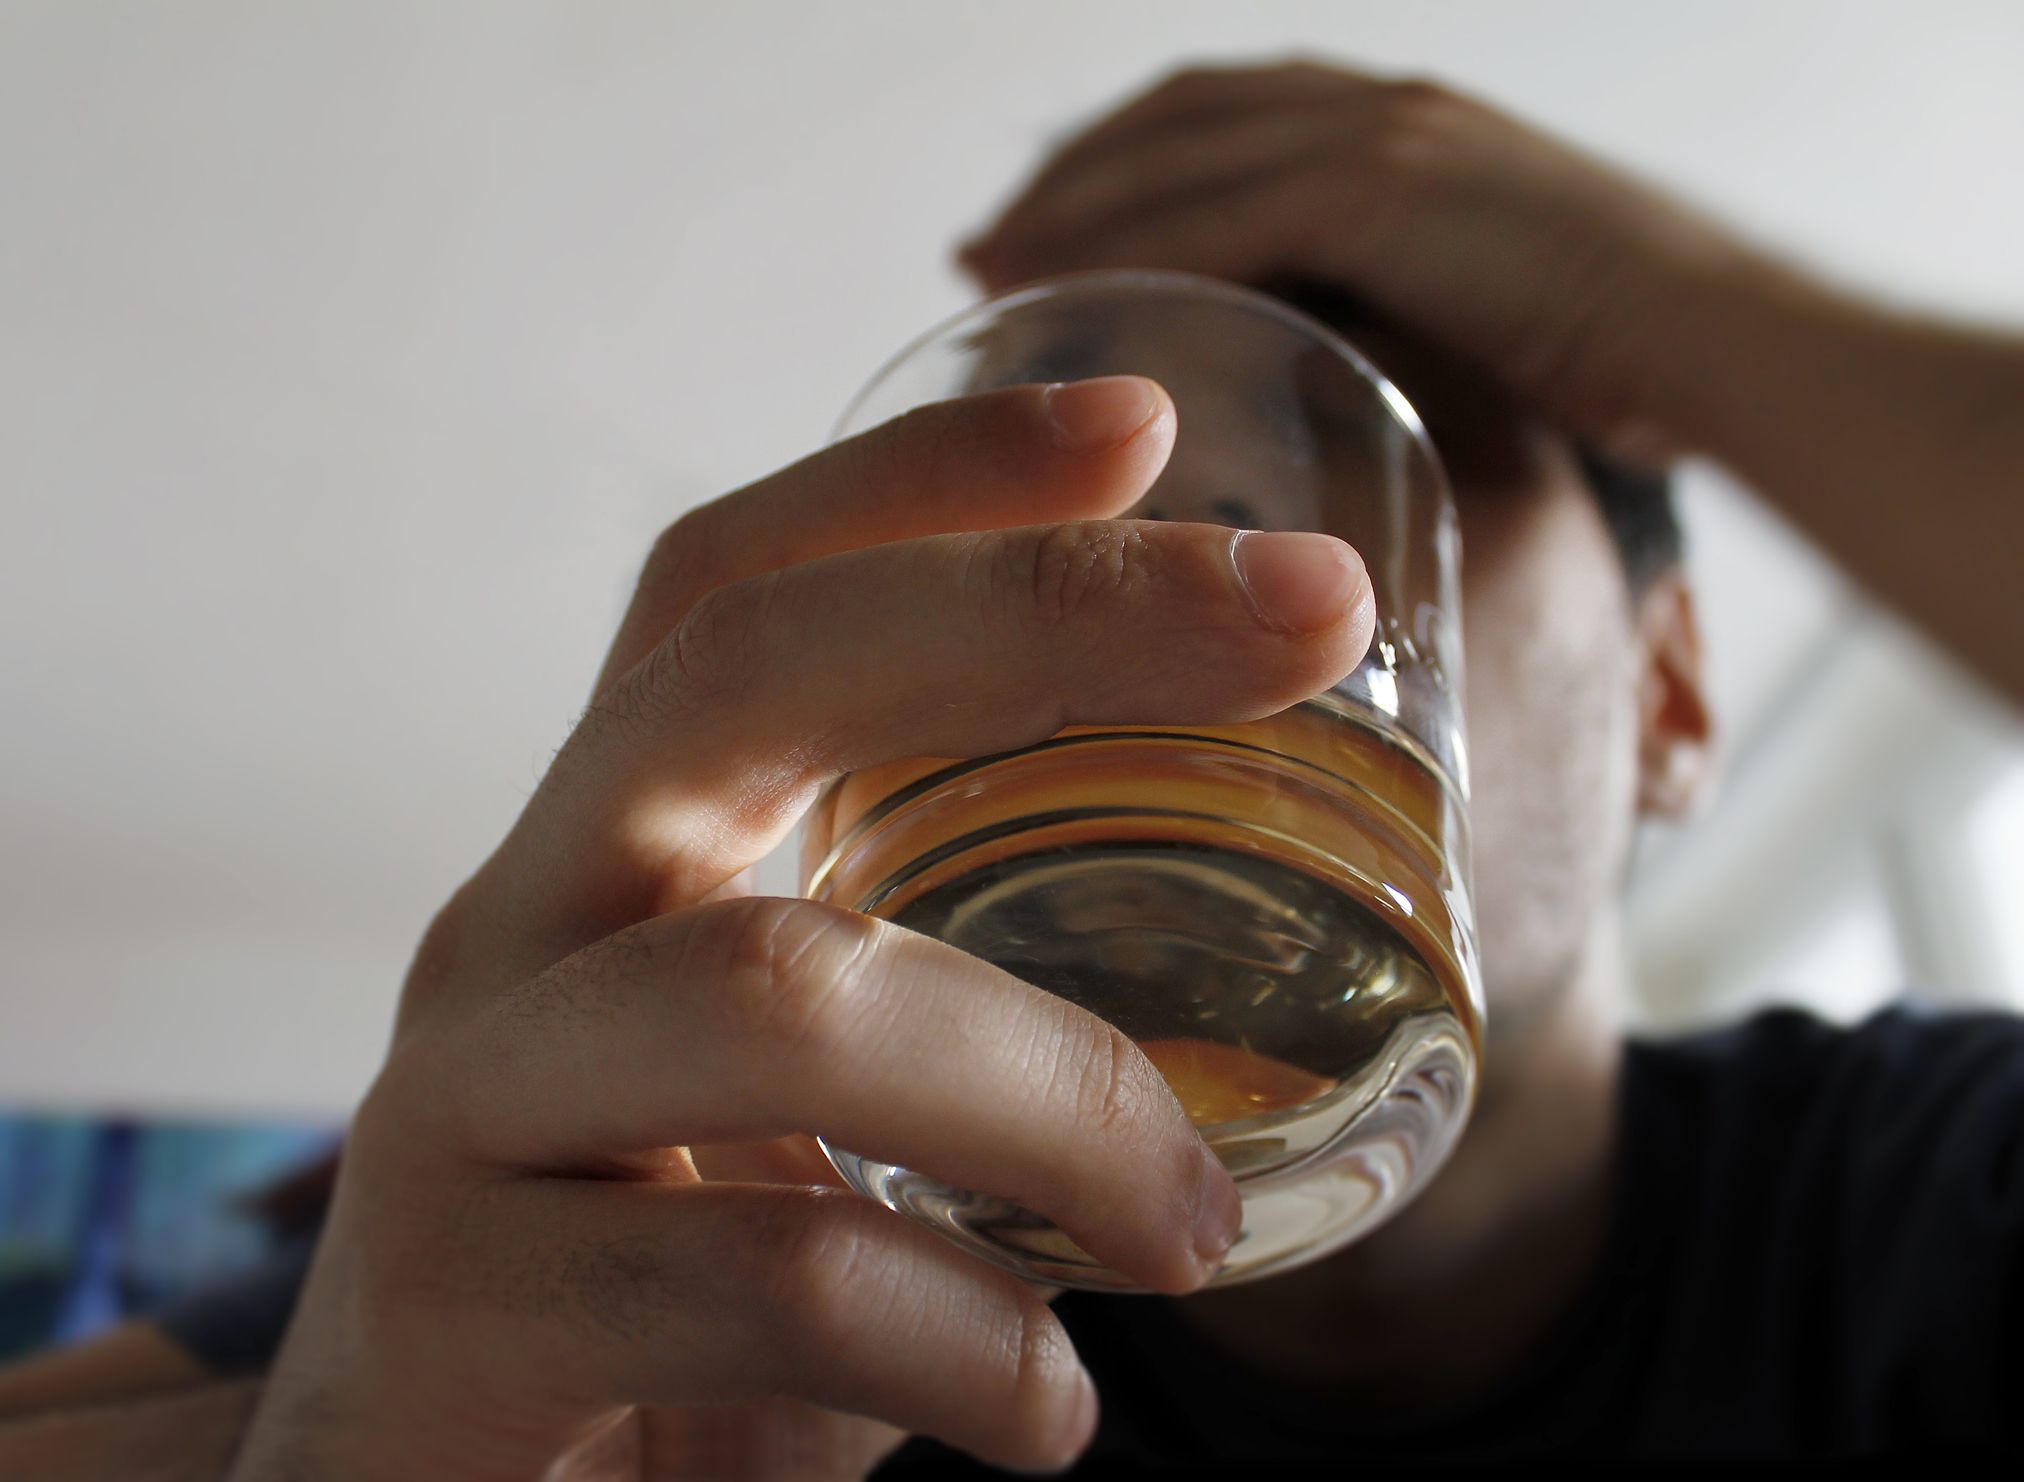 Previous research has linked heavy alcohol use to changes to the structure of the brain. GETTY